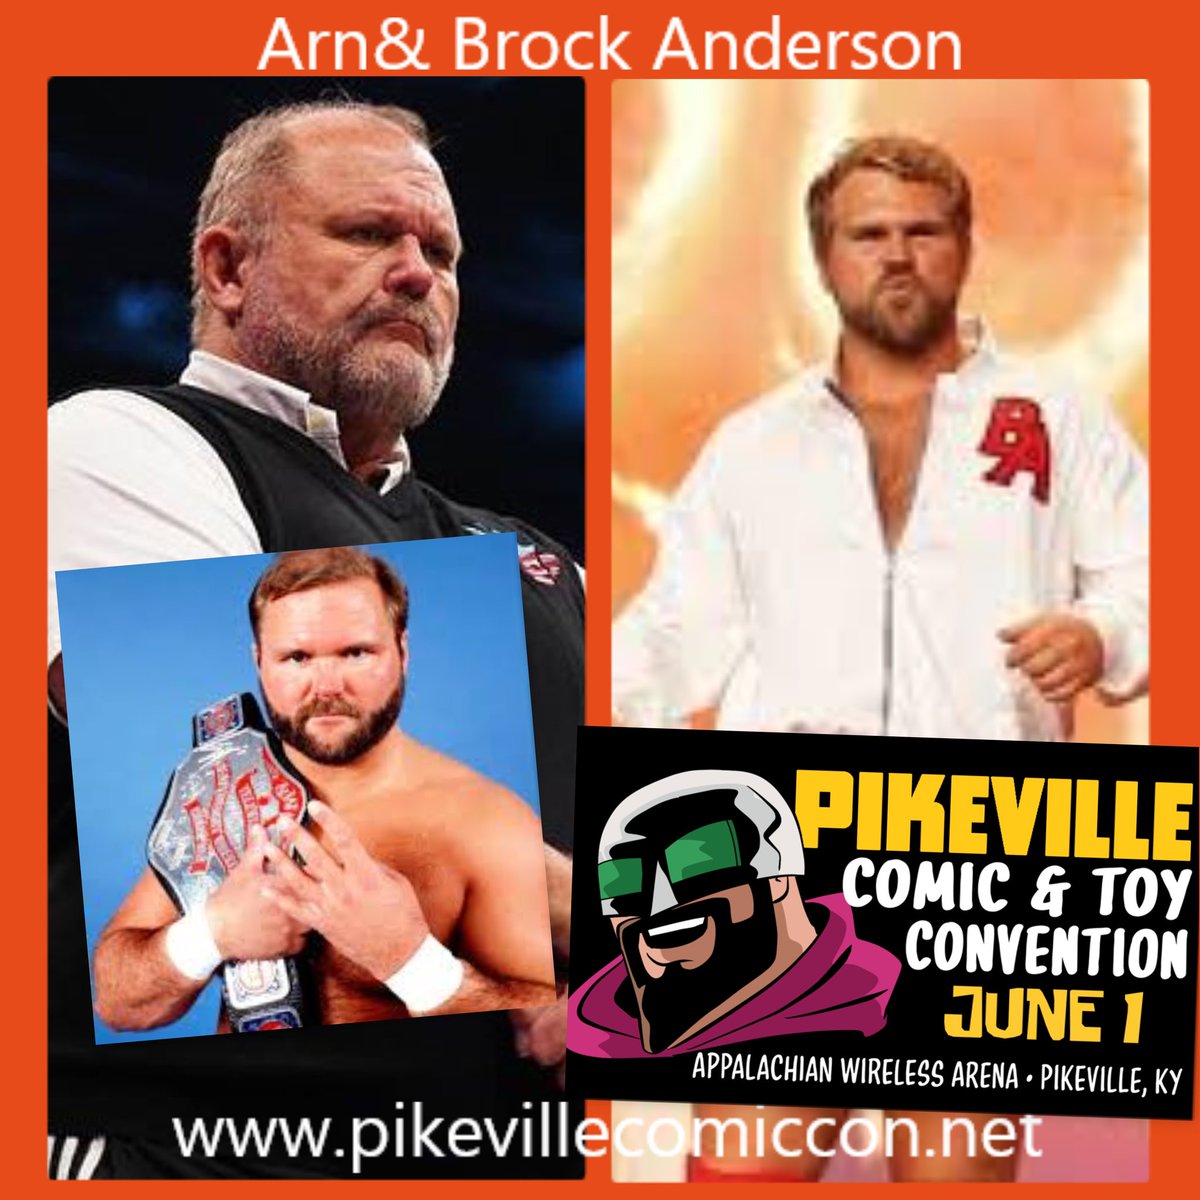 June is almost here and I'm kicking off the month with @BrockAndersonnn at the Pikeville Comic & Toy Convention! See you in #Kentucky on June 1st to take pictures, sign autographs, and spend some quality time with our great fans. PikevilleComicCon.net